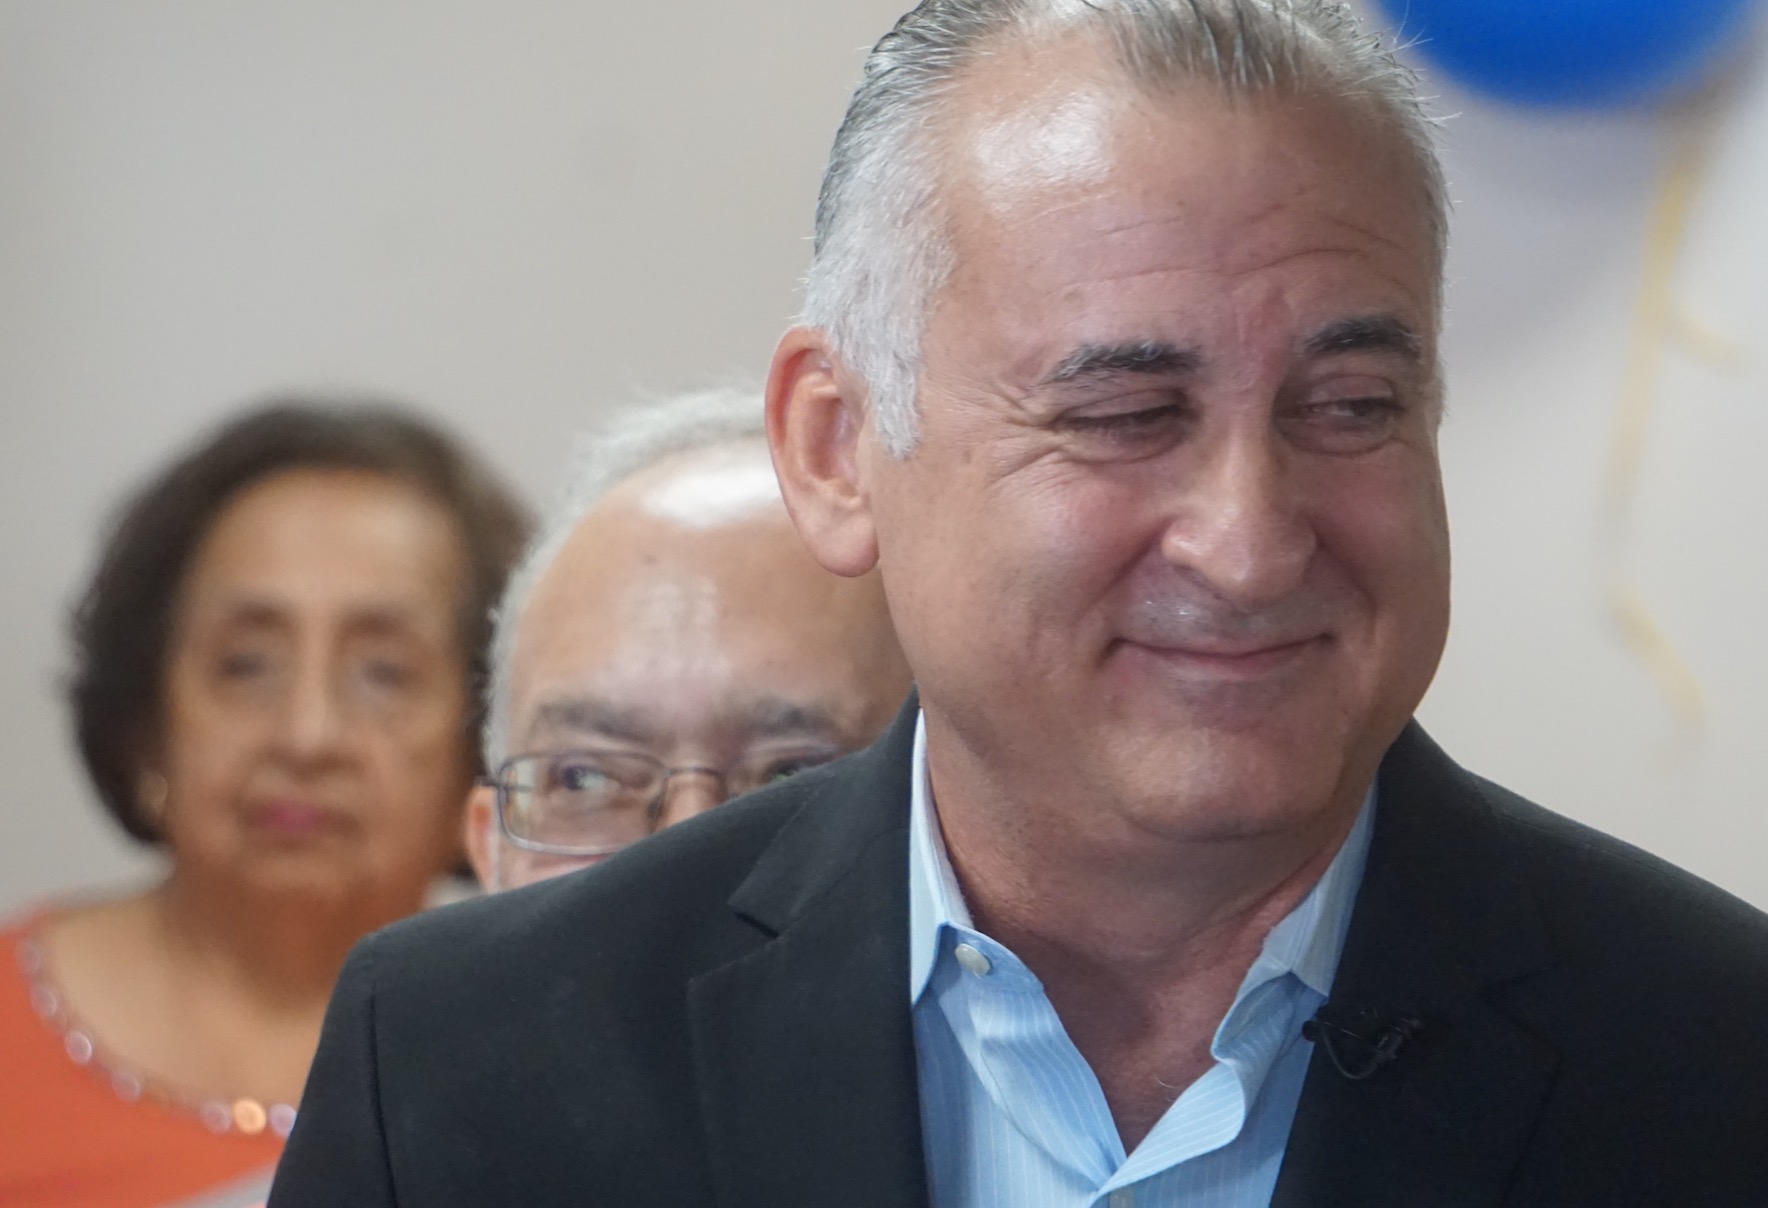 Bovo runs for Miami-Dade mayor, sets up match-up with Penelas